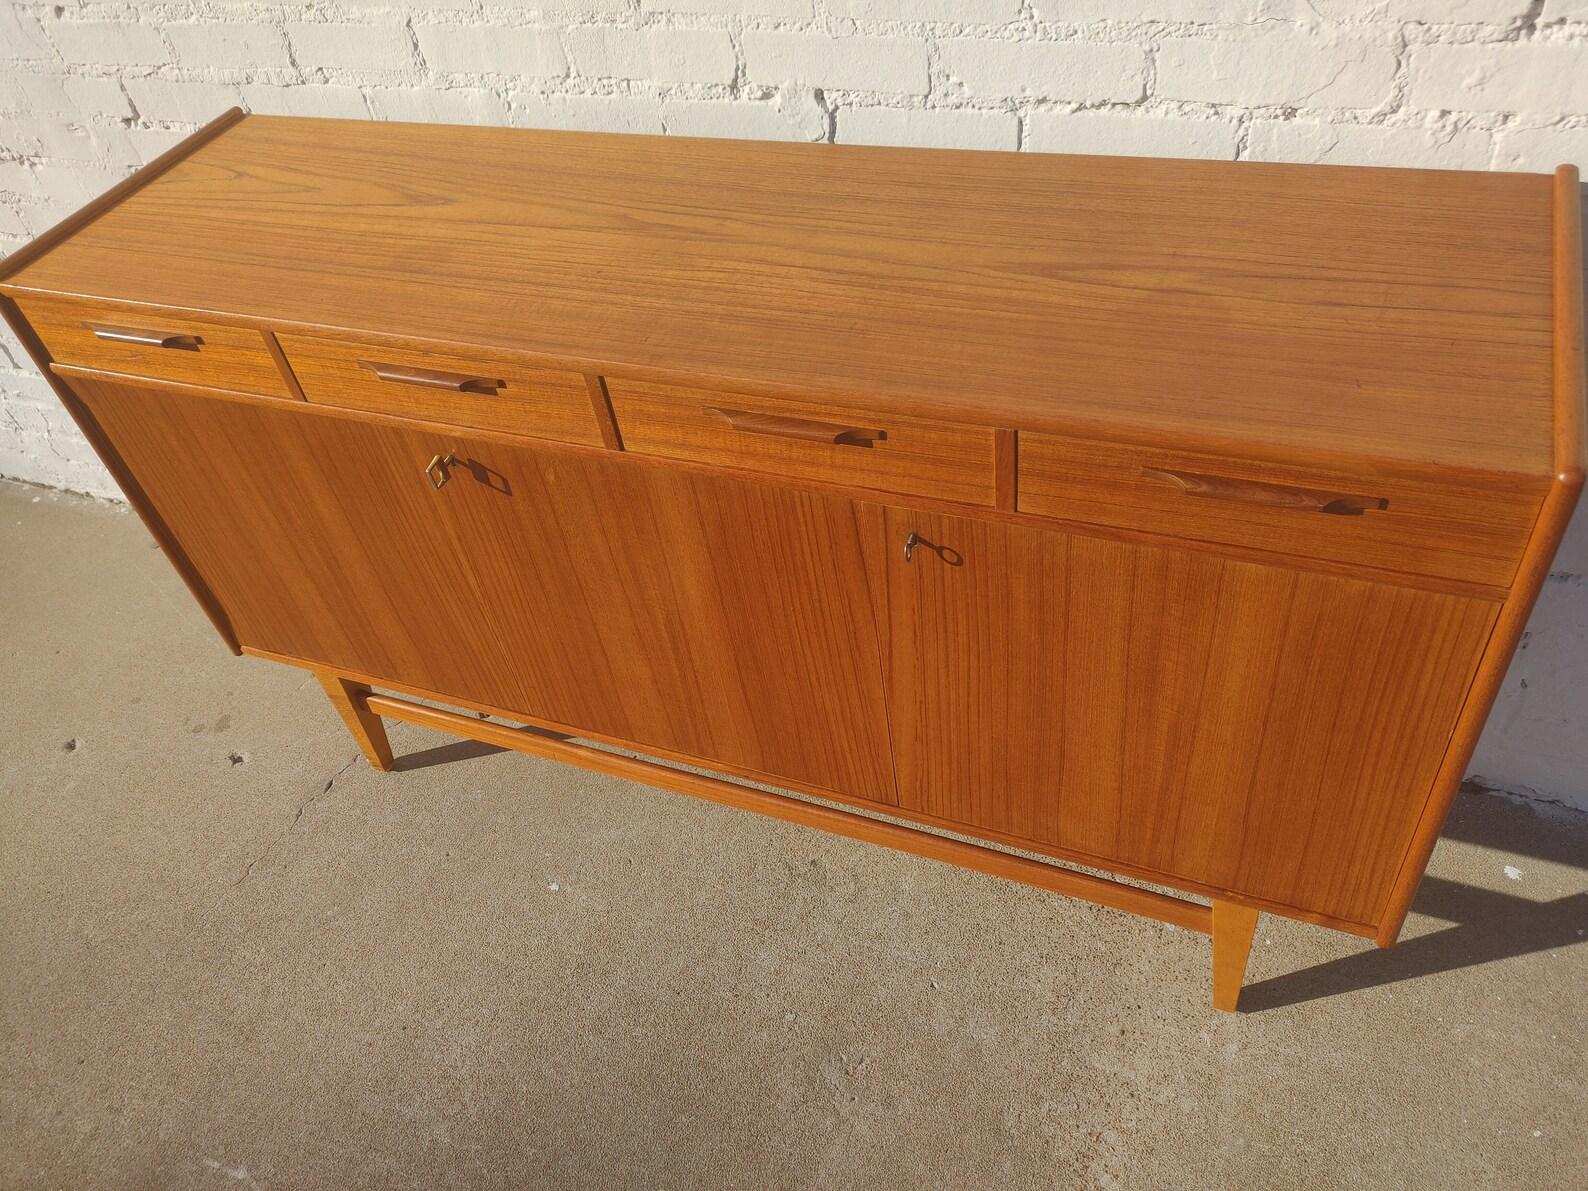 Mid Century Danish Modern Teak Sideboard

Above average vintage condition and structurally sound. Has some expected slight finish wear and scratching. Top has a couple very slight ring discolorations. Lower left side of credenza has some veneer